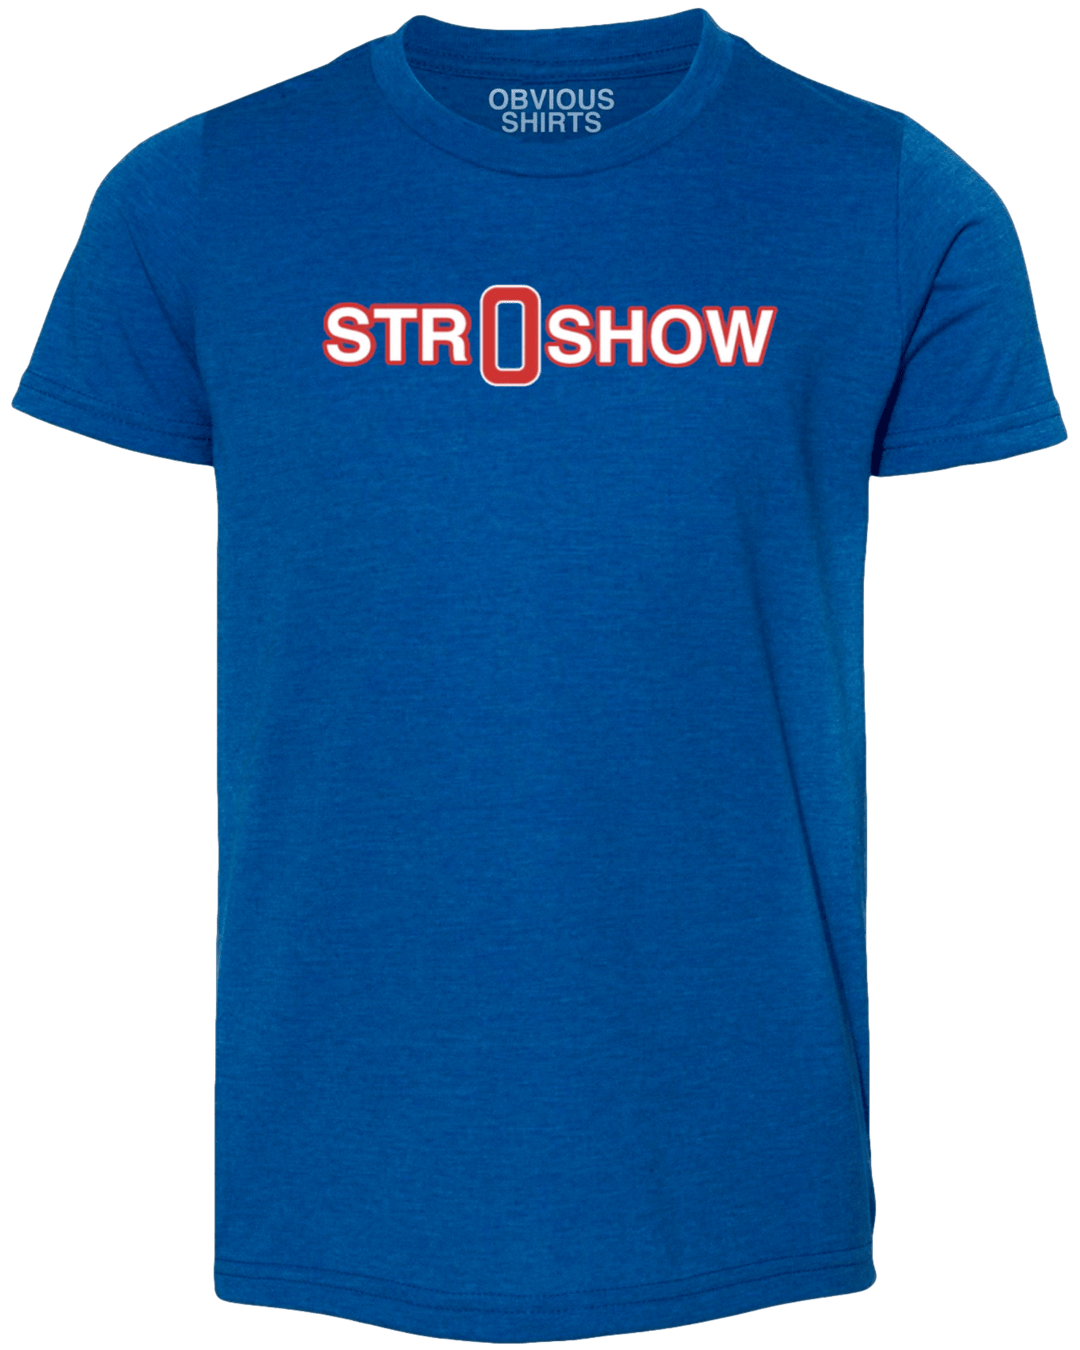 STR0SHOW (YOUTH) - OBVIOUS SHIRTS.